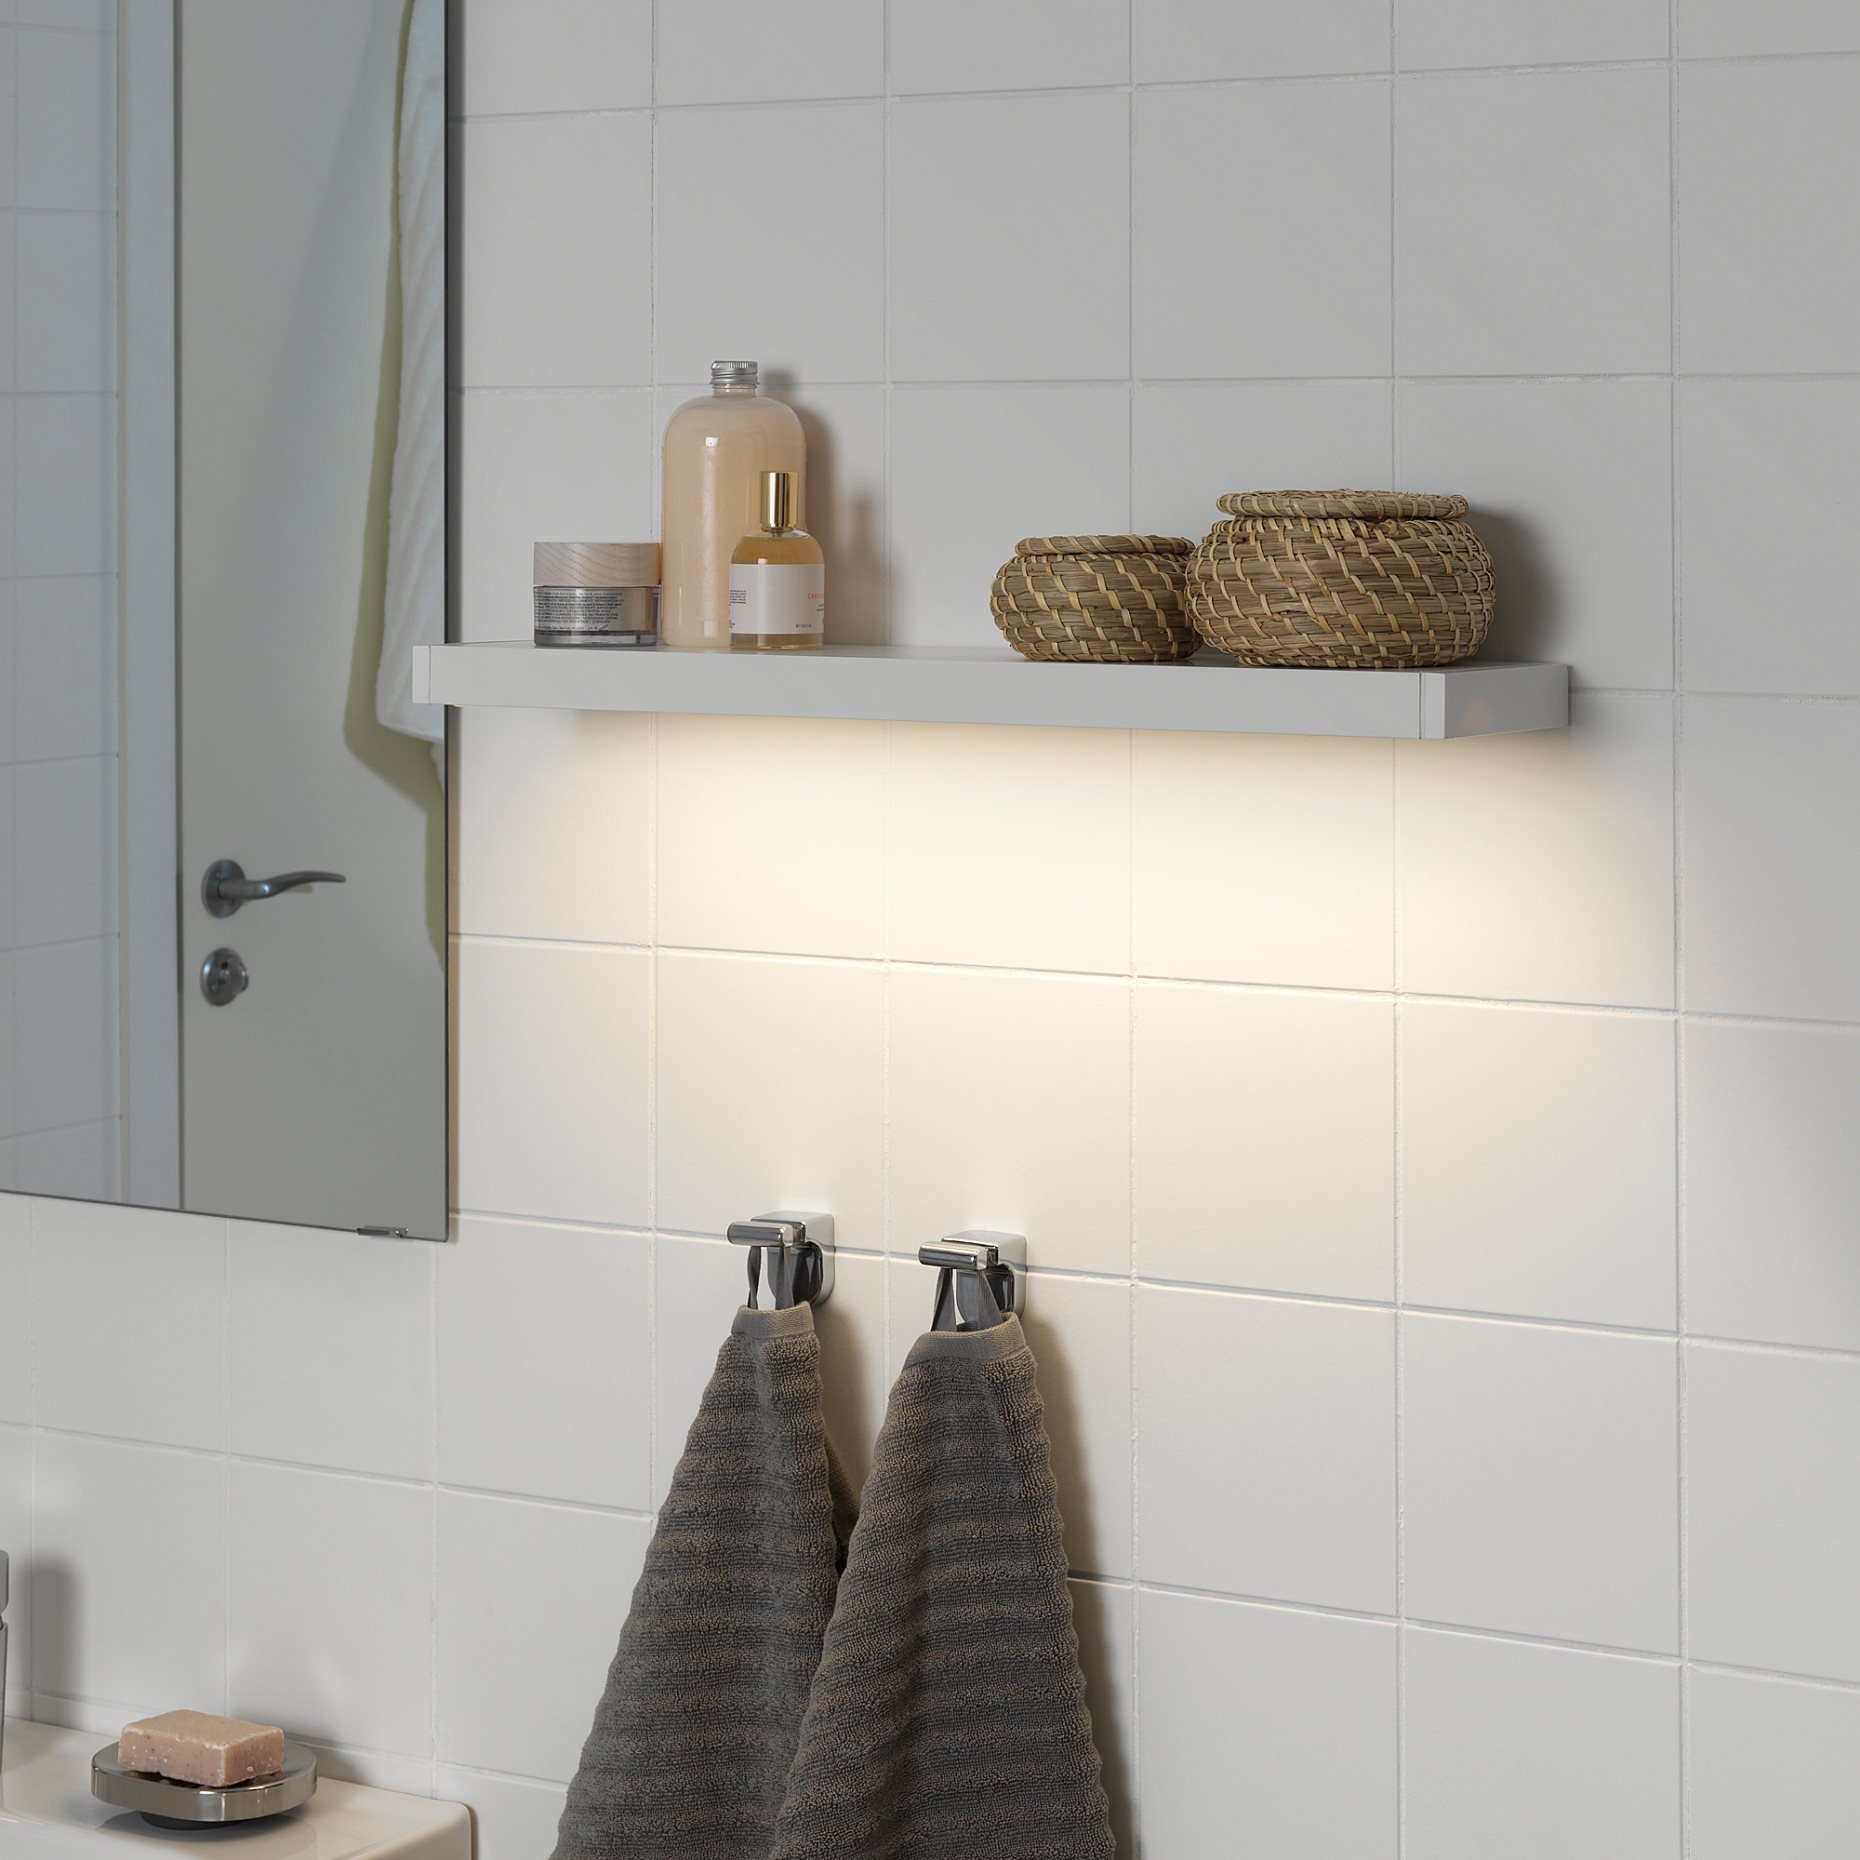 GODMORGON, cabinet/wall lighting with built-in LED light source, 60 cm, 605.373.95